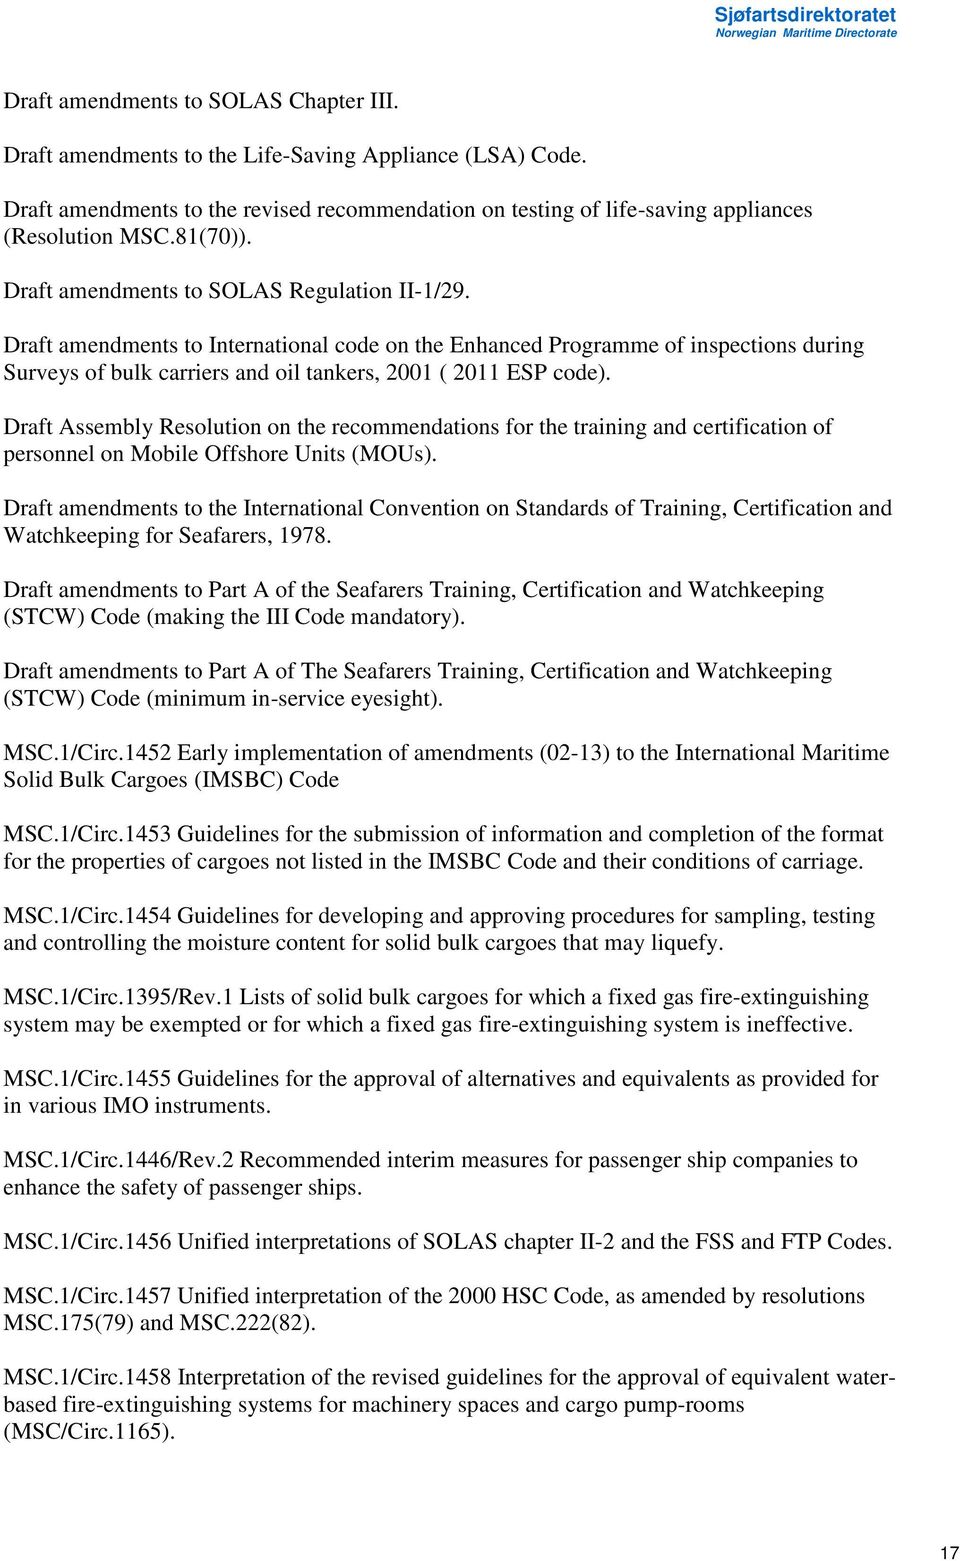 Draft amendments to International code on the Enhanced Programme of inspections during Surveys of bulk carriers and oil tankers, 2001 ( 2011 ESP code).